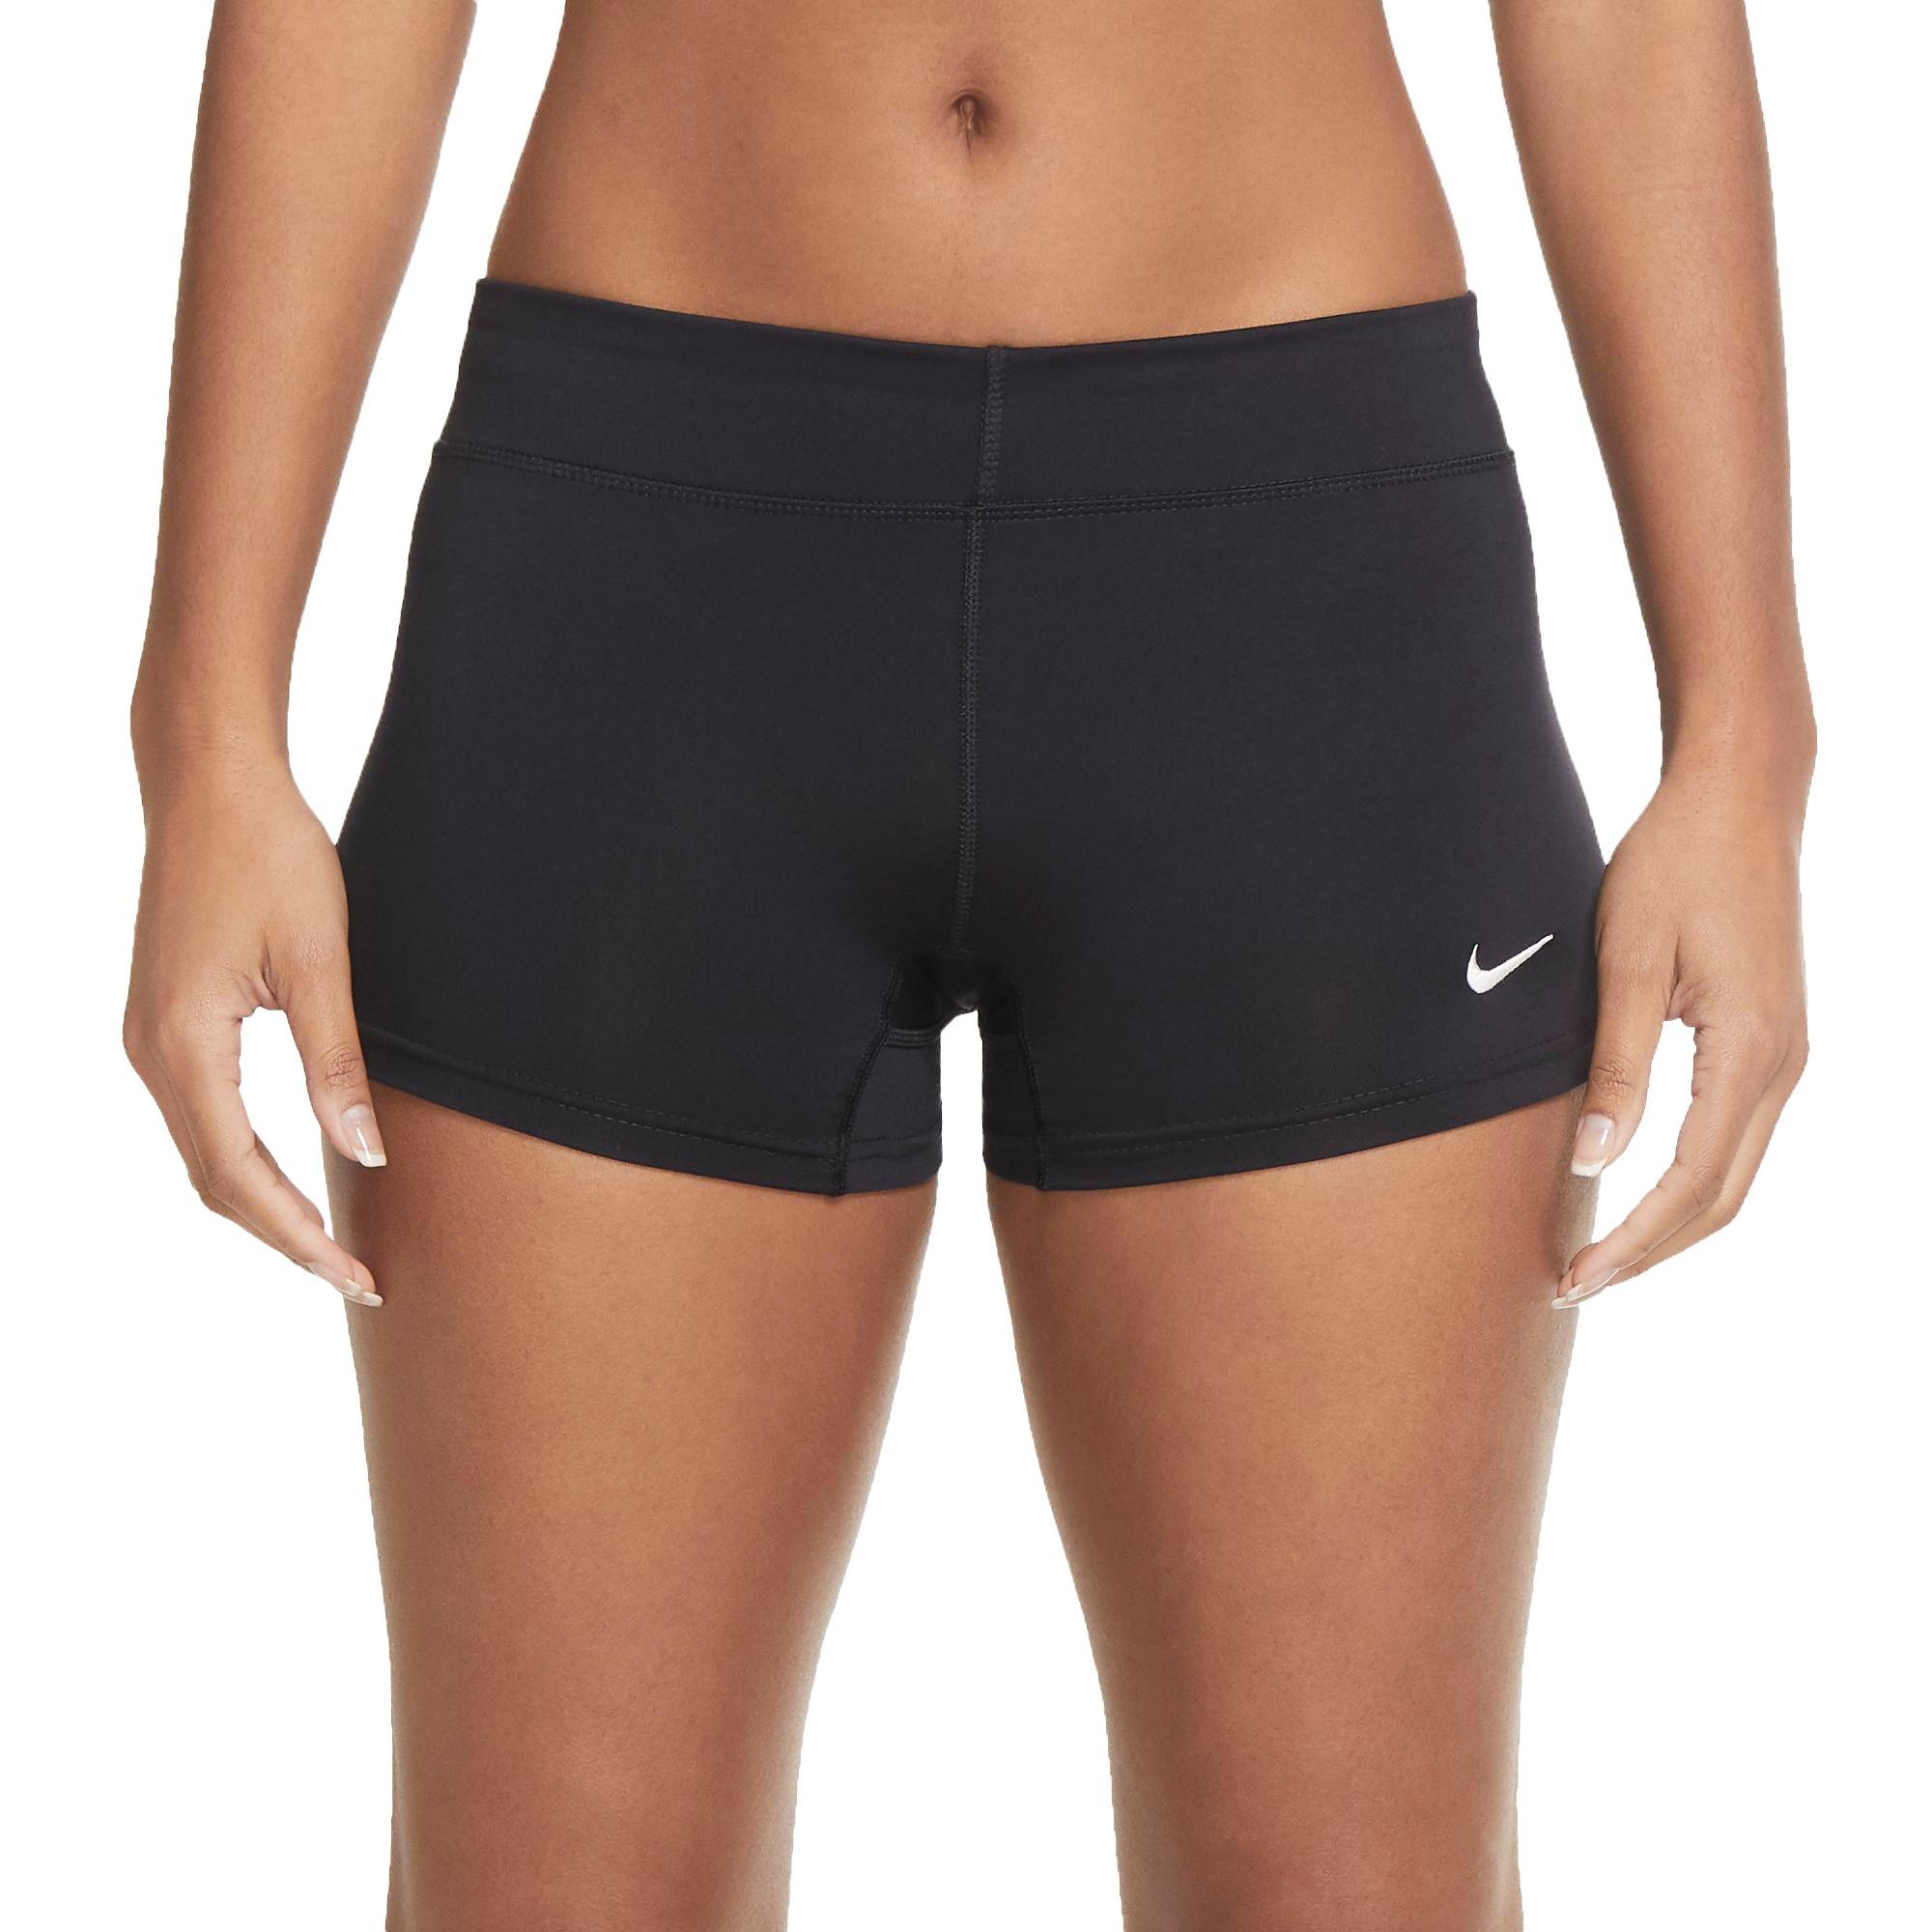 Women's Compression Volleyball Shorts 3/7 Spandex Workout Pro Shorts for  Women